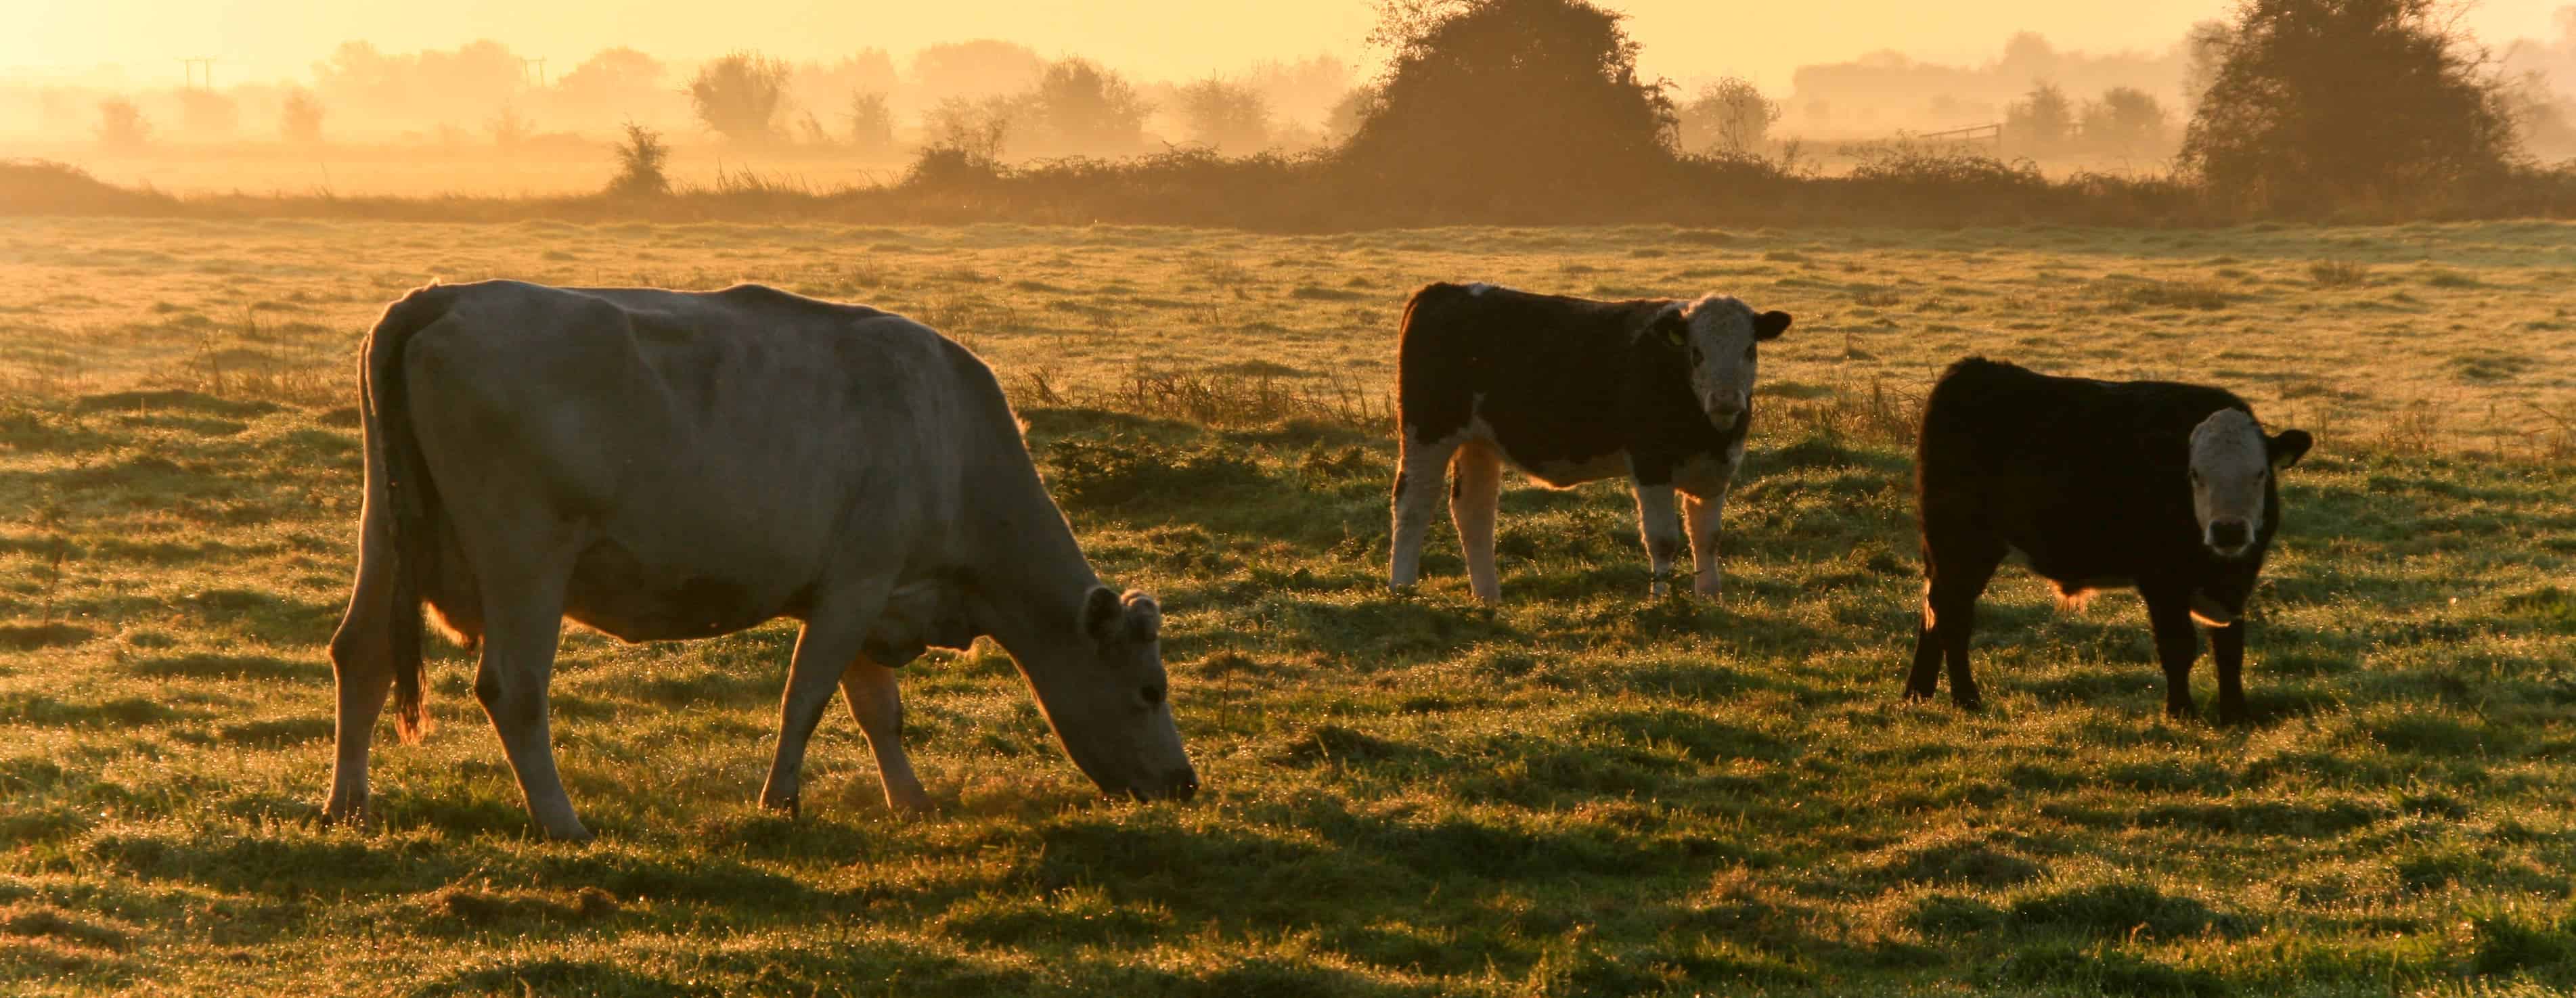 Cows grazing in a lovely autumn morning. Image via IDS photos.